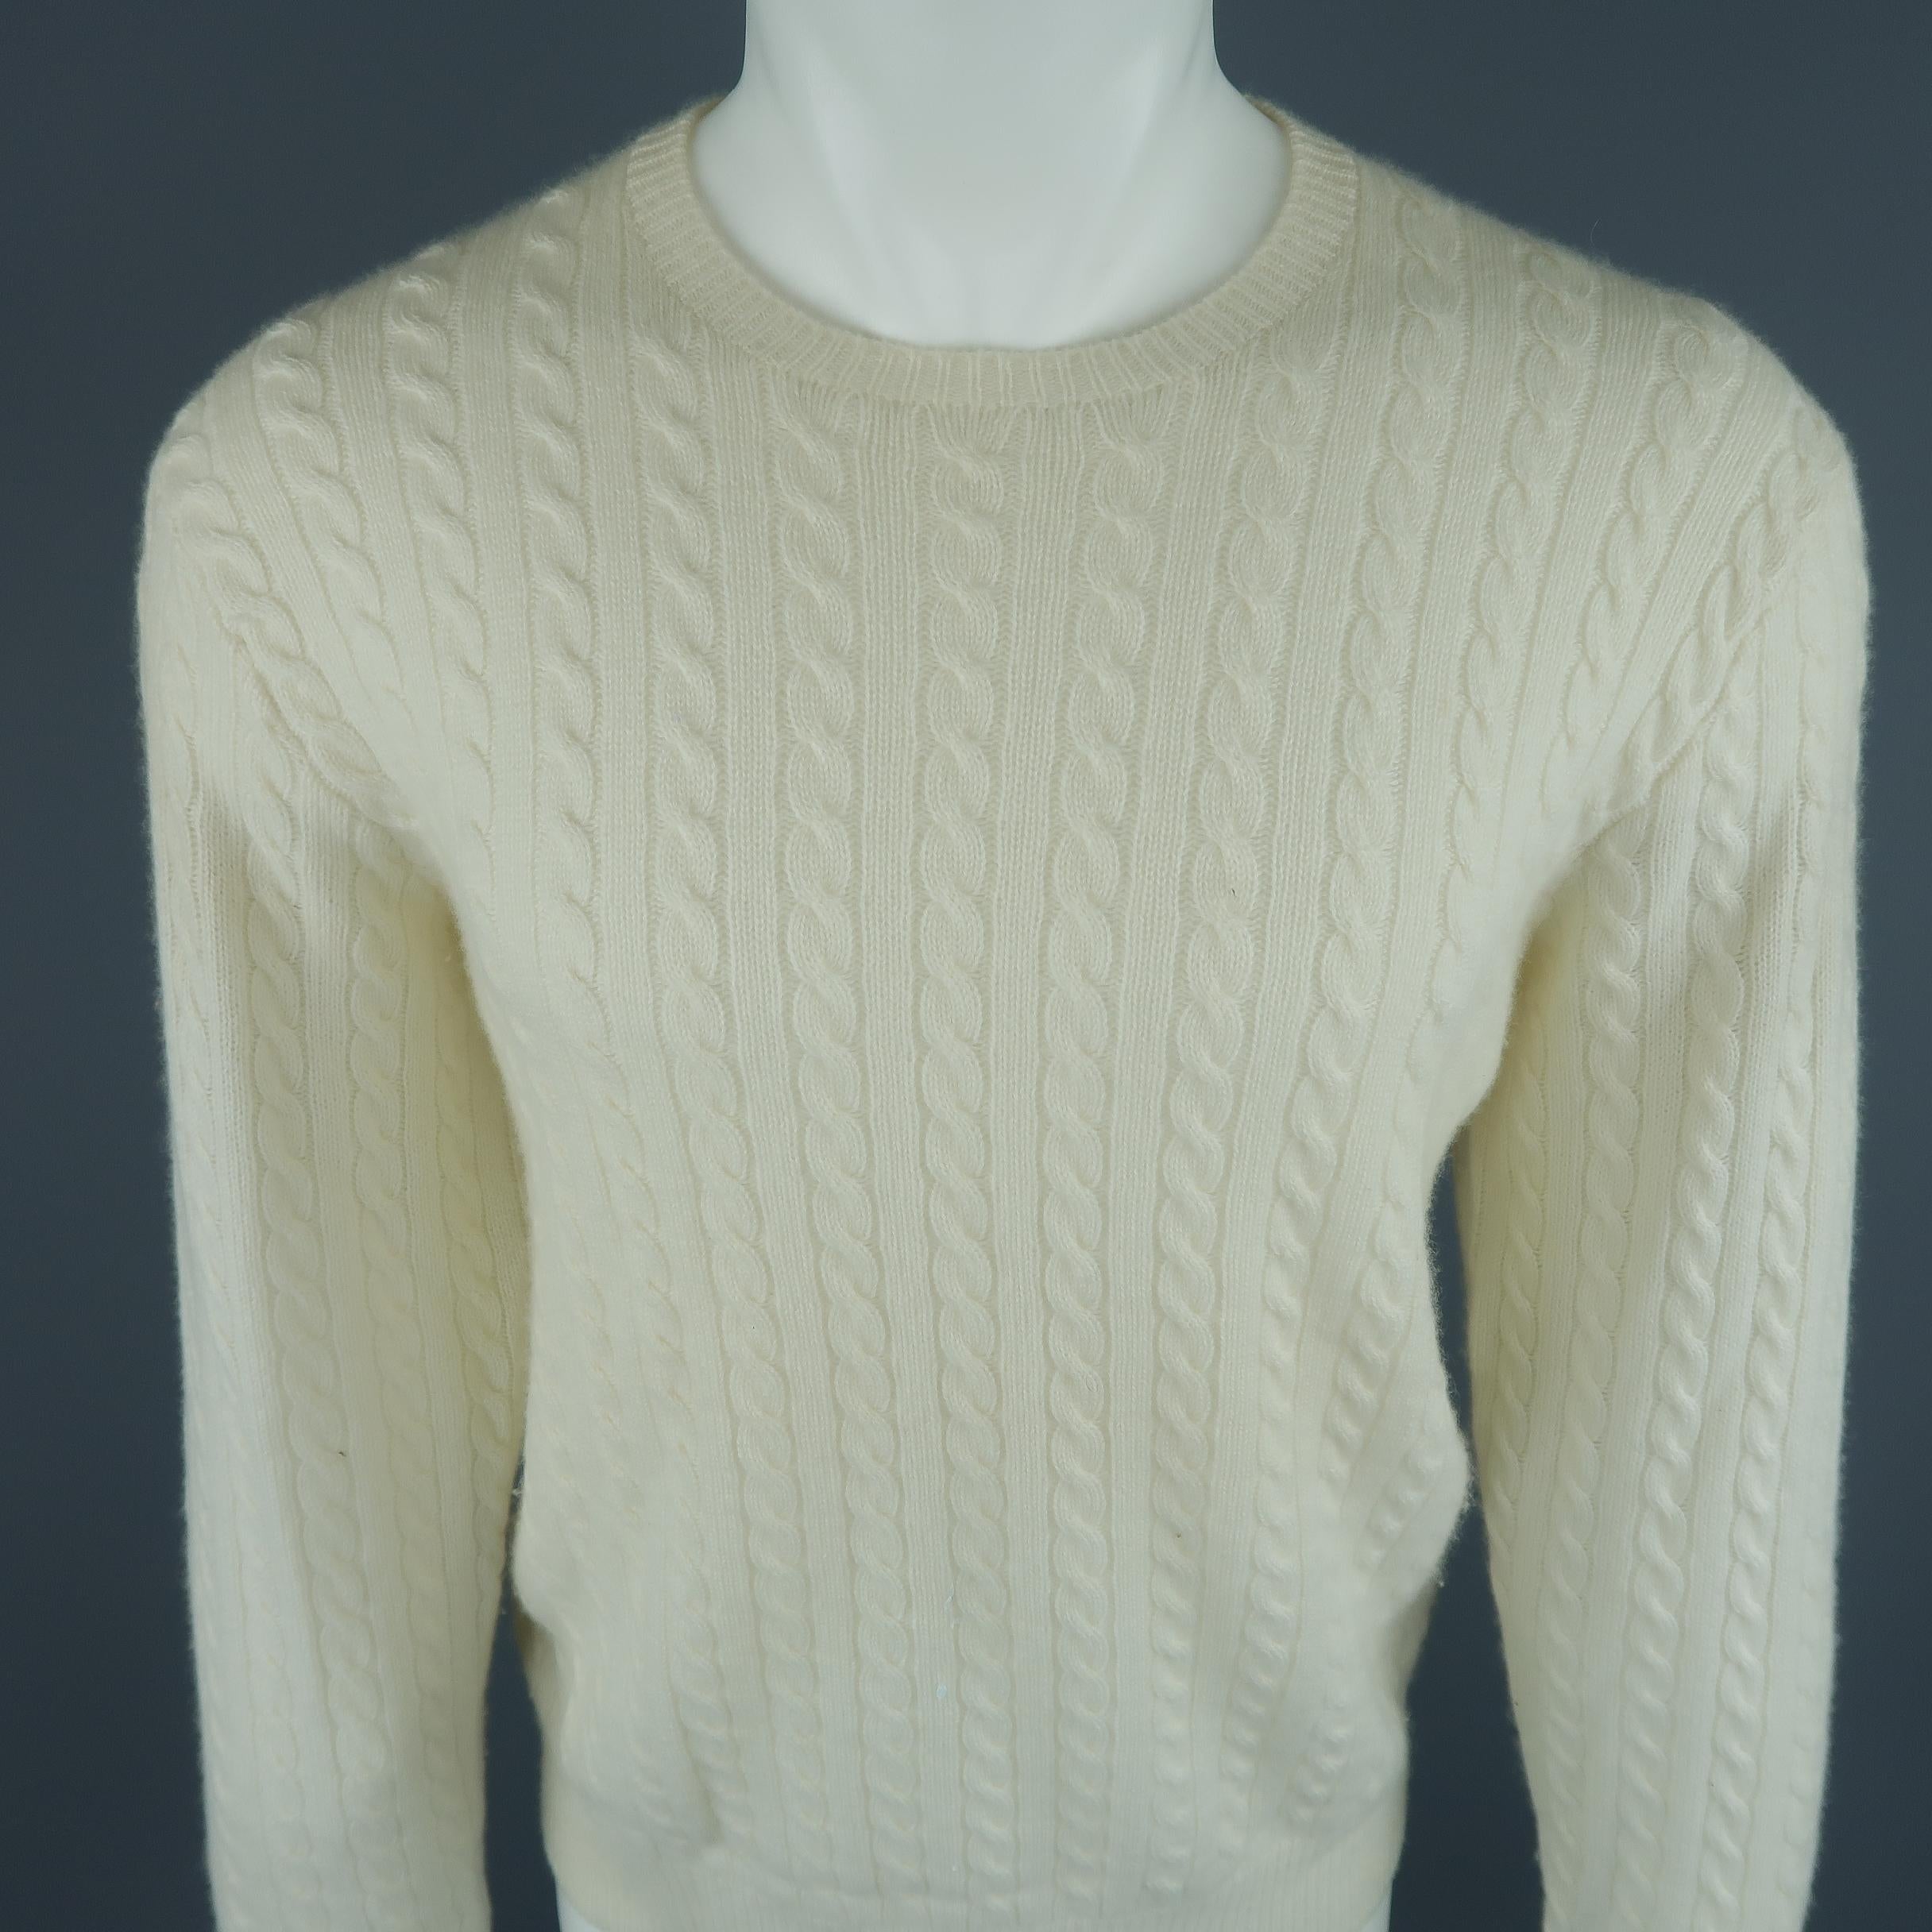 Polo Golf By Ralph Lauren sweater come in 100% Cashmere in an off white tone cable knit, with a crewneck and ribbed cuff and waistband. Made in Japan.
 
Fair Pre-Owned Condition, with little stains on the sleeves.
Marked: M
 
Measurements:
